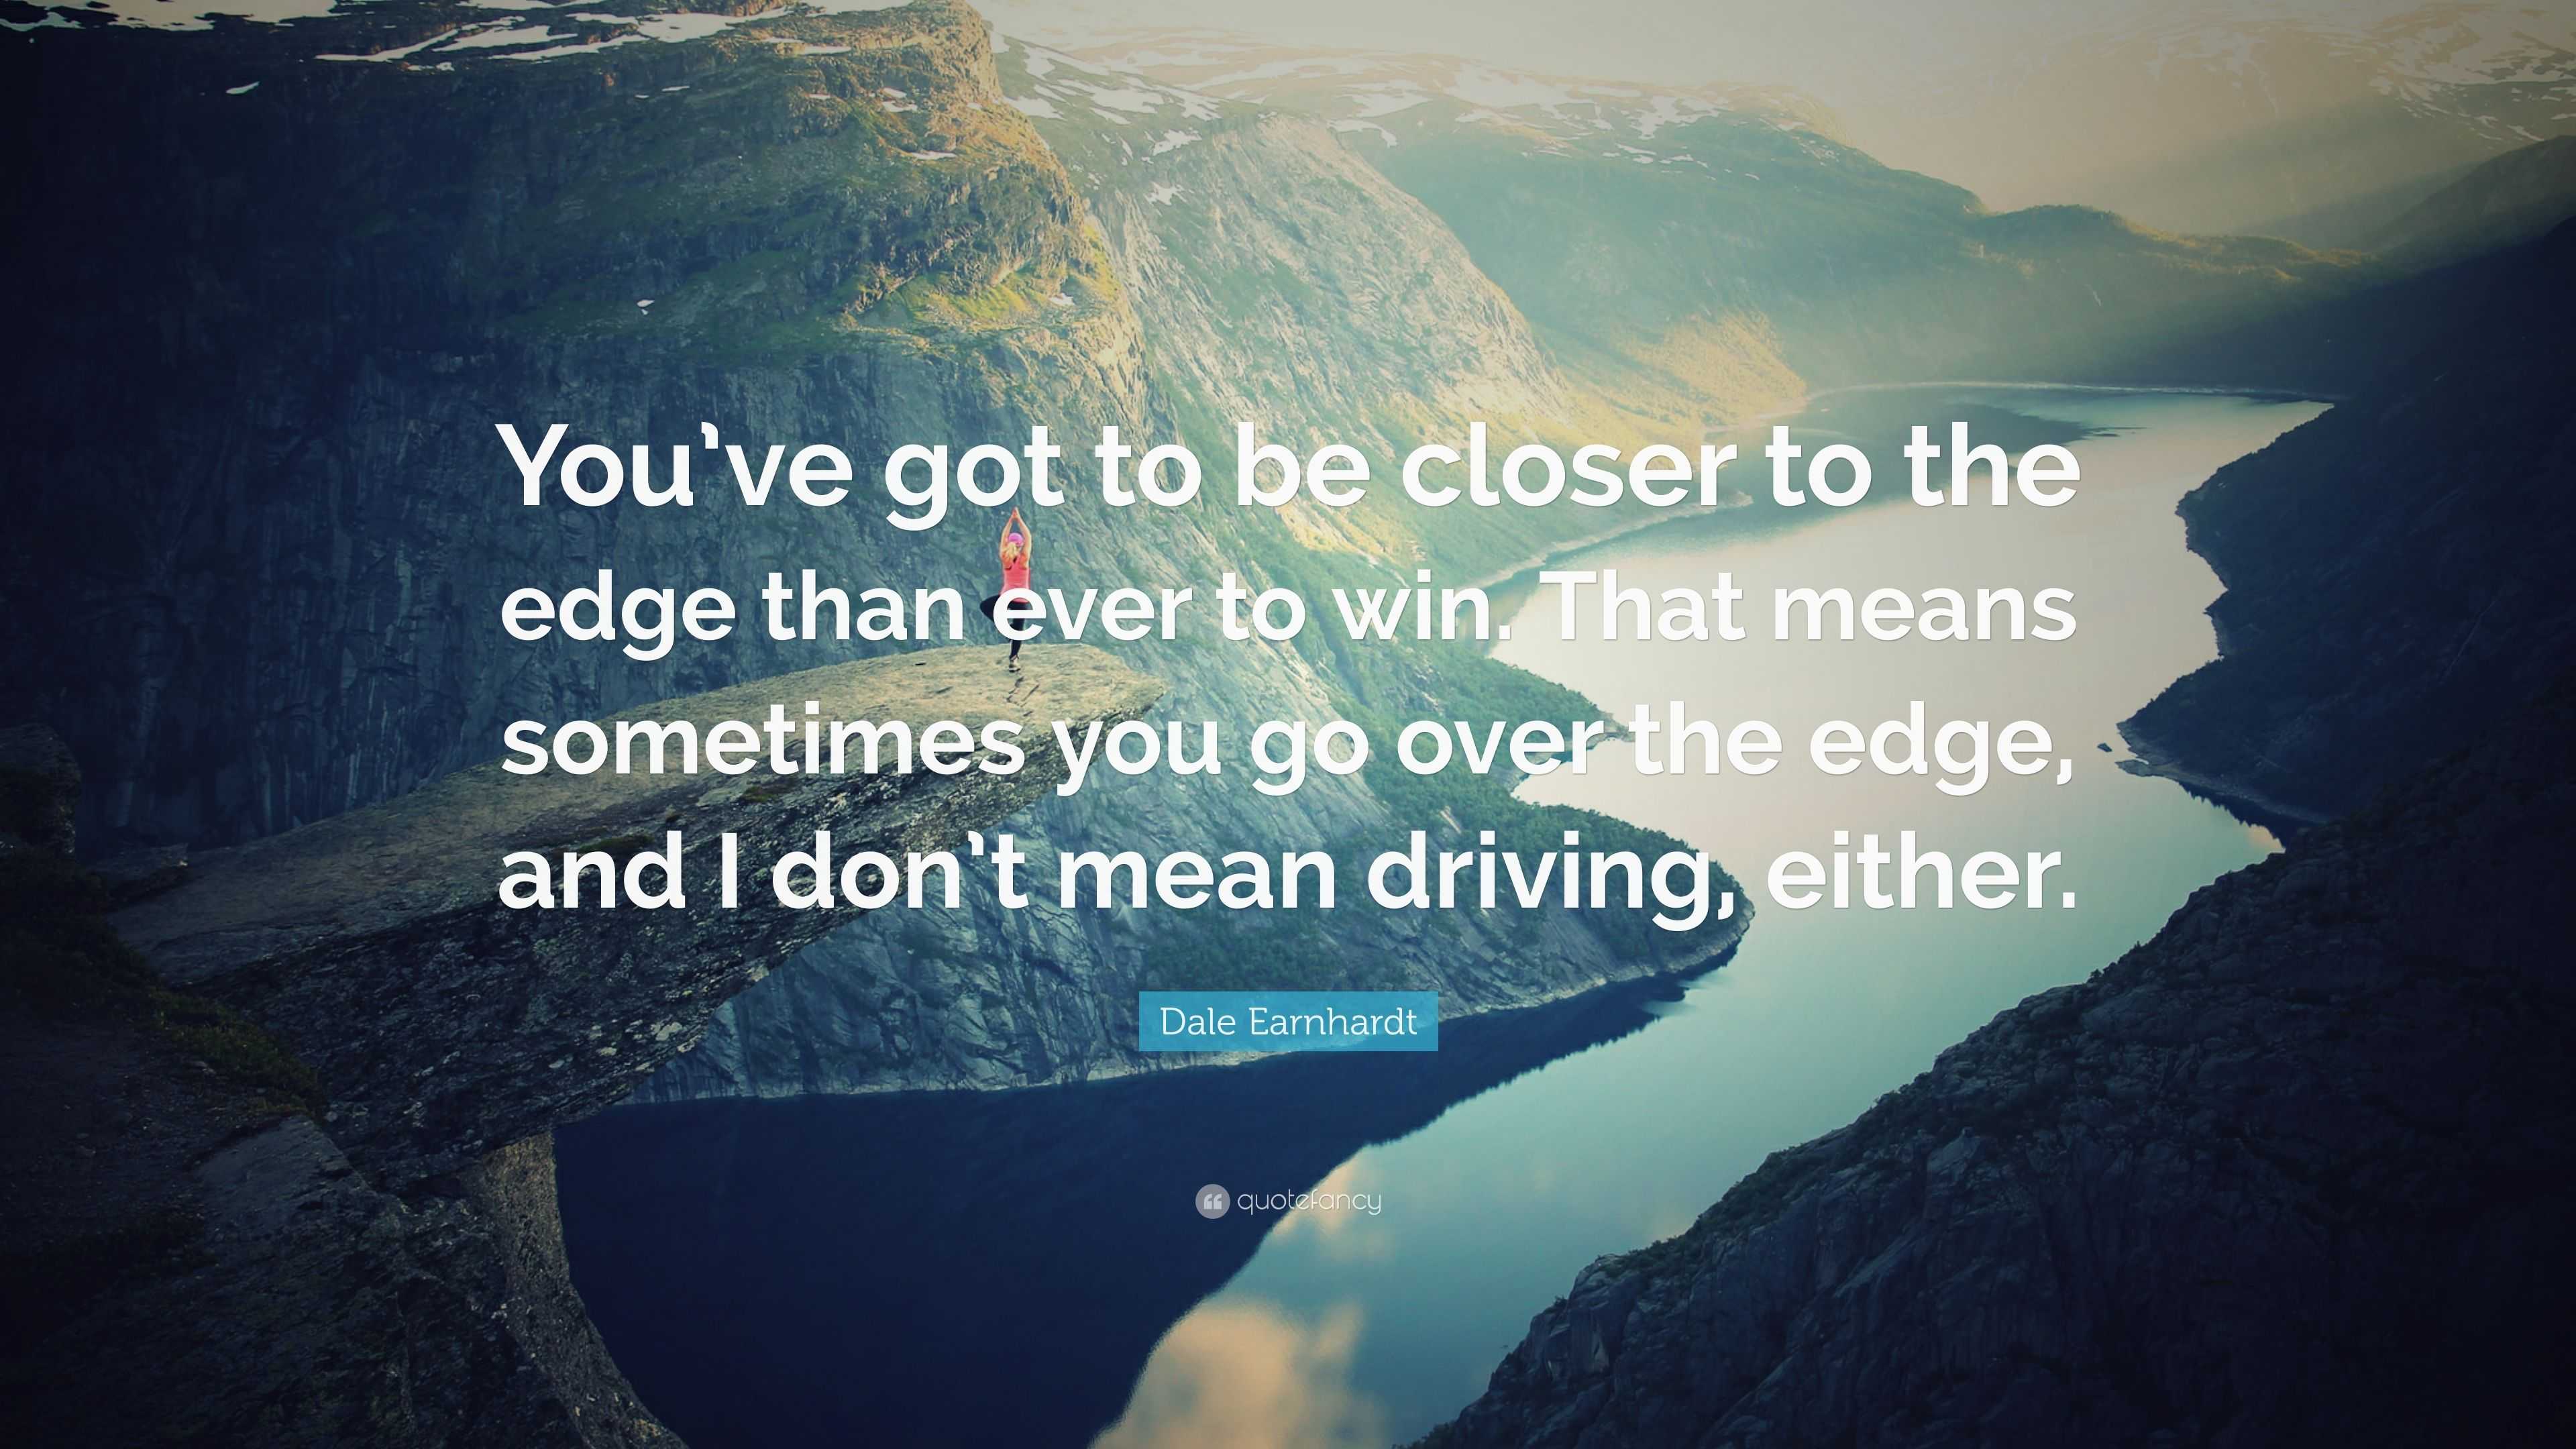 Dale Earnhardt Quote: “You've got to be closer to the edge than